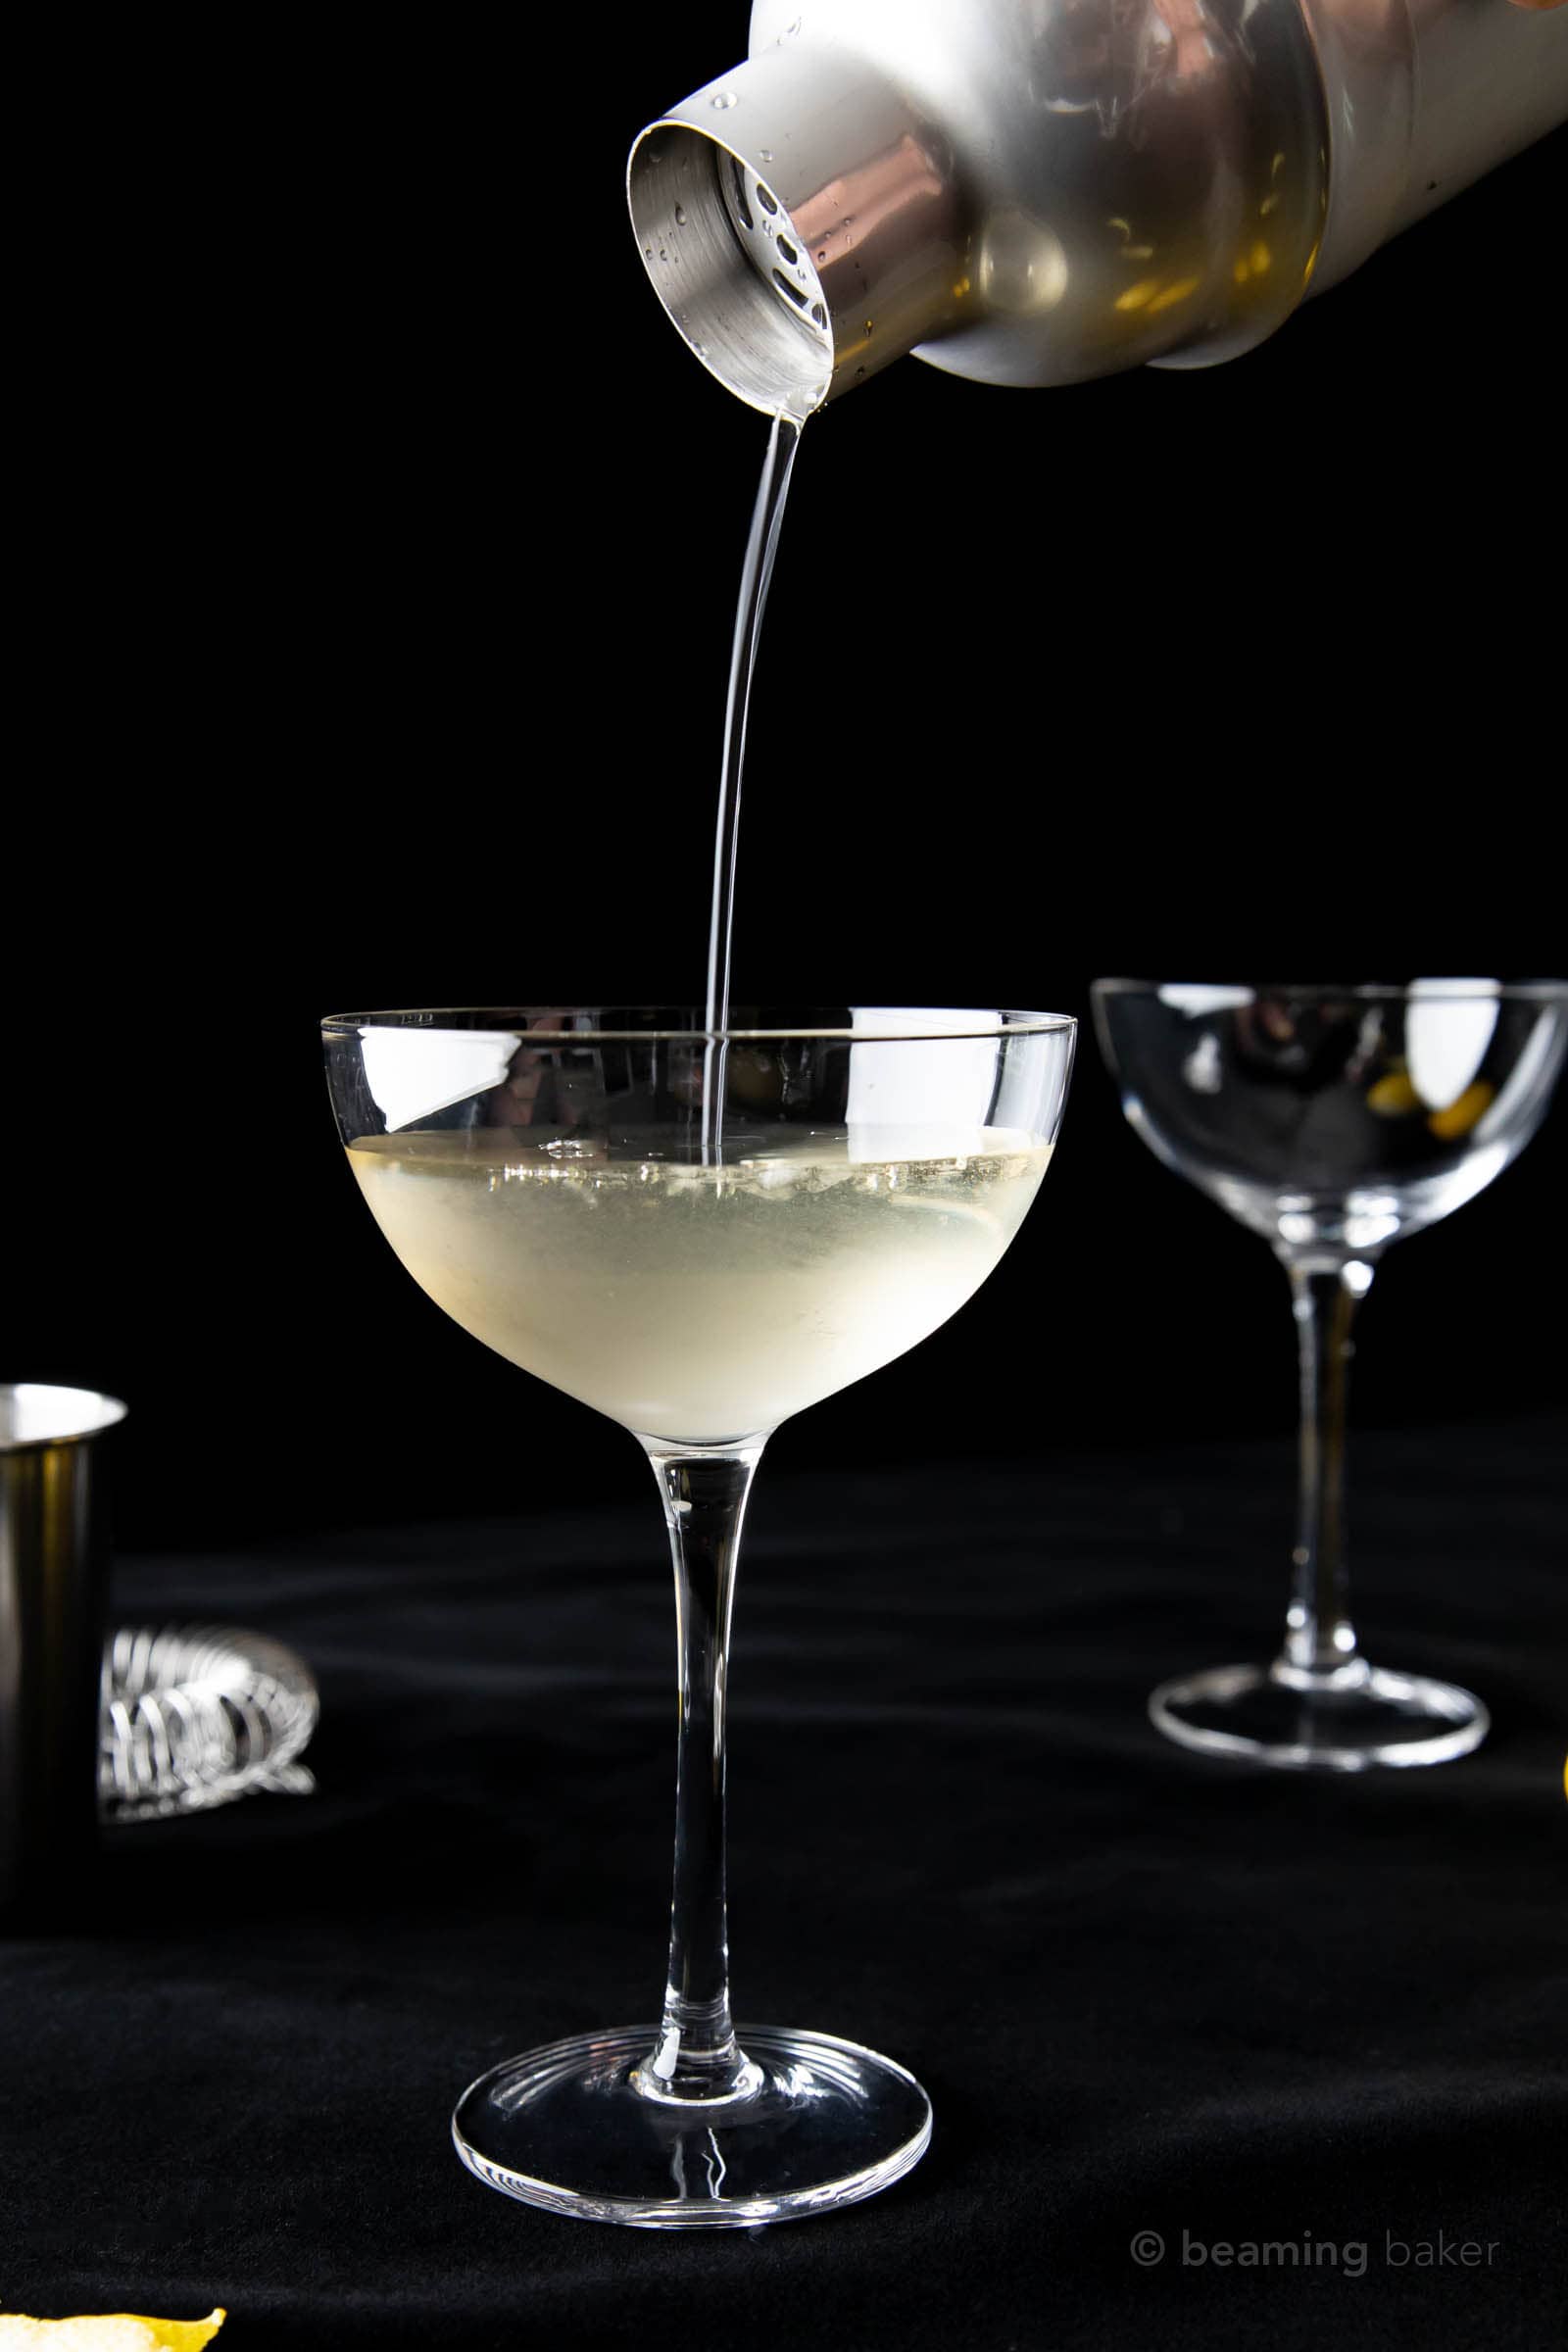 50 50 martini recipe being pouring from a stainless steel cocktail shaker into a half-filled glass